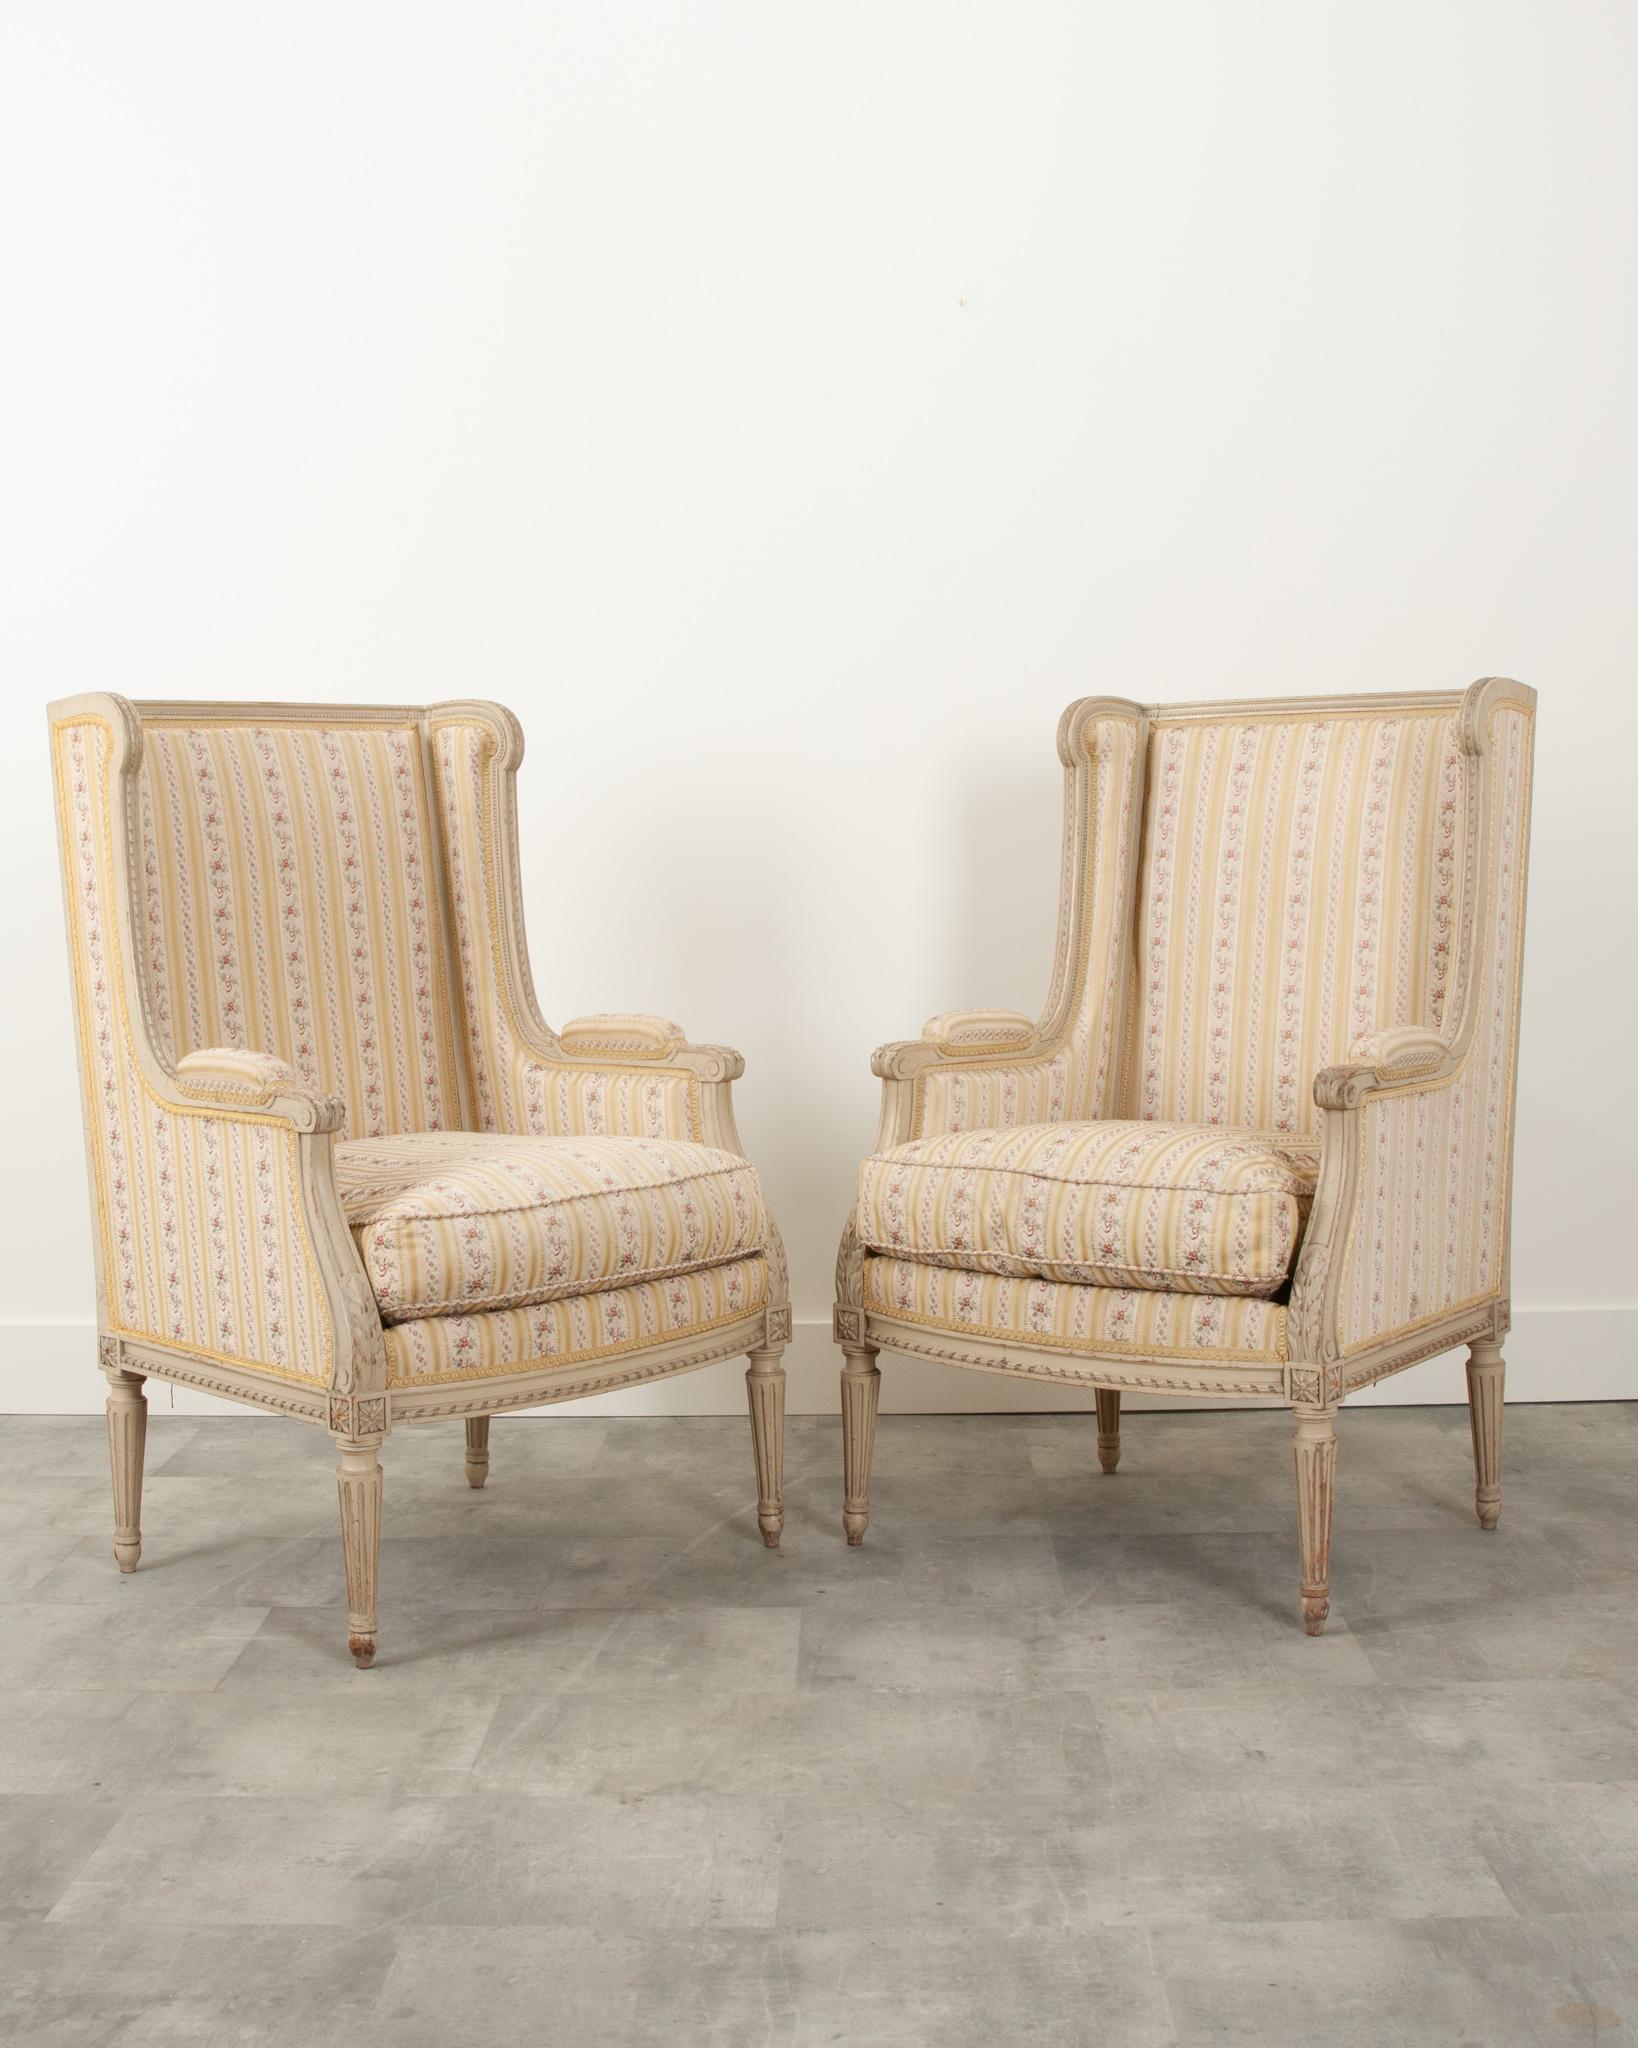 This pair of French Louis XVI-Style bergeres are in wonderful condition. The frames are 19th century, hand carved with a twisted ribbon border, acanthus leaf arms, and painted in its original finish. Upholstered in elegant stripe floral fabric with